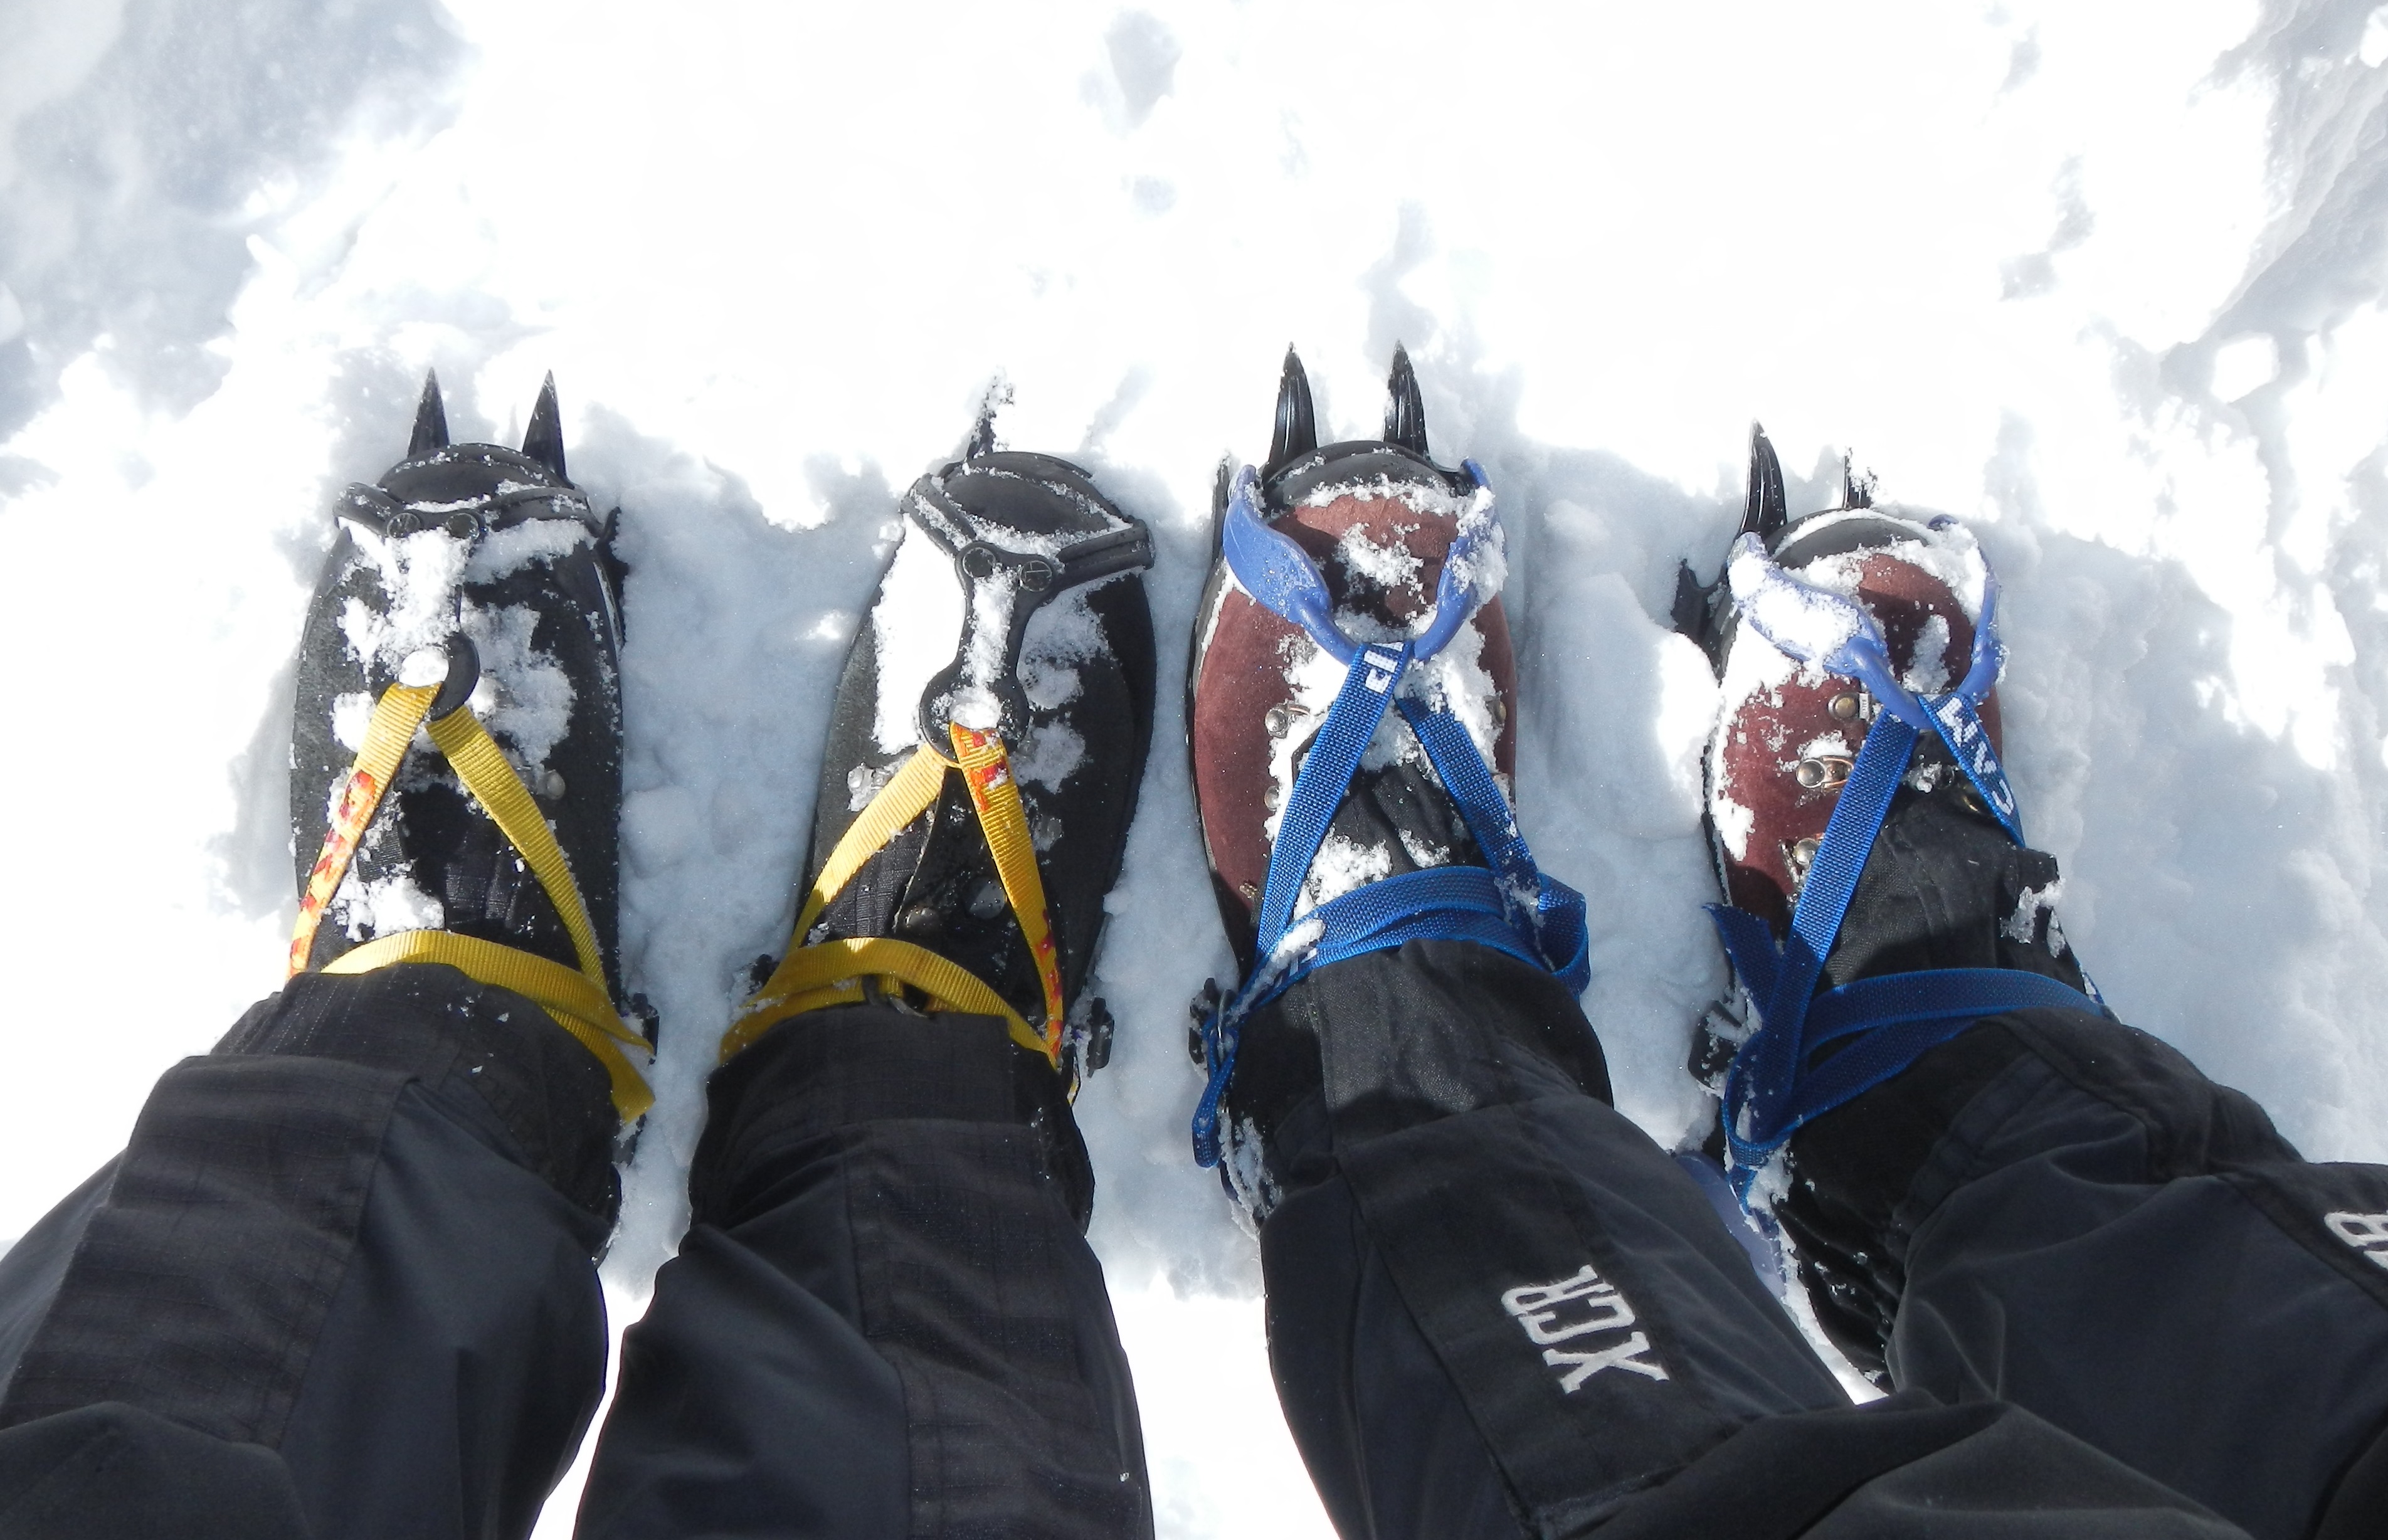 Mountaineering boot and crampon guide 